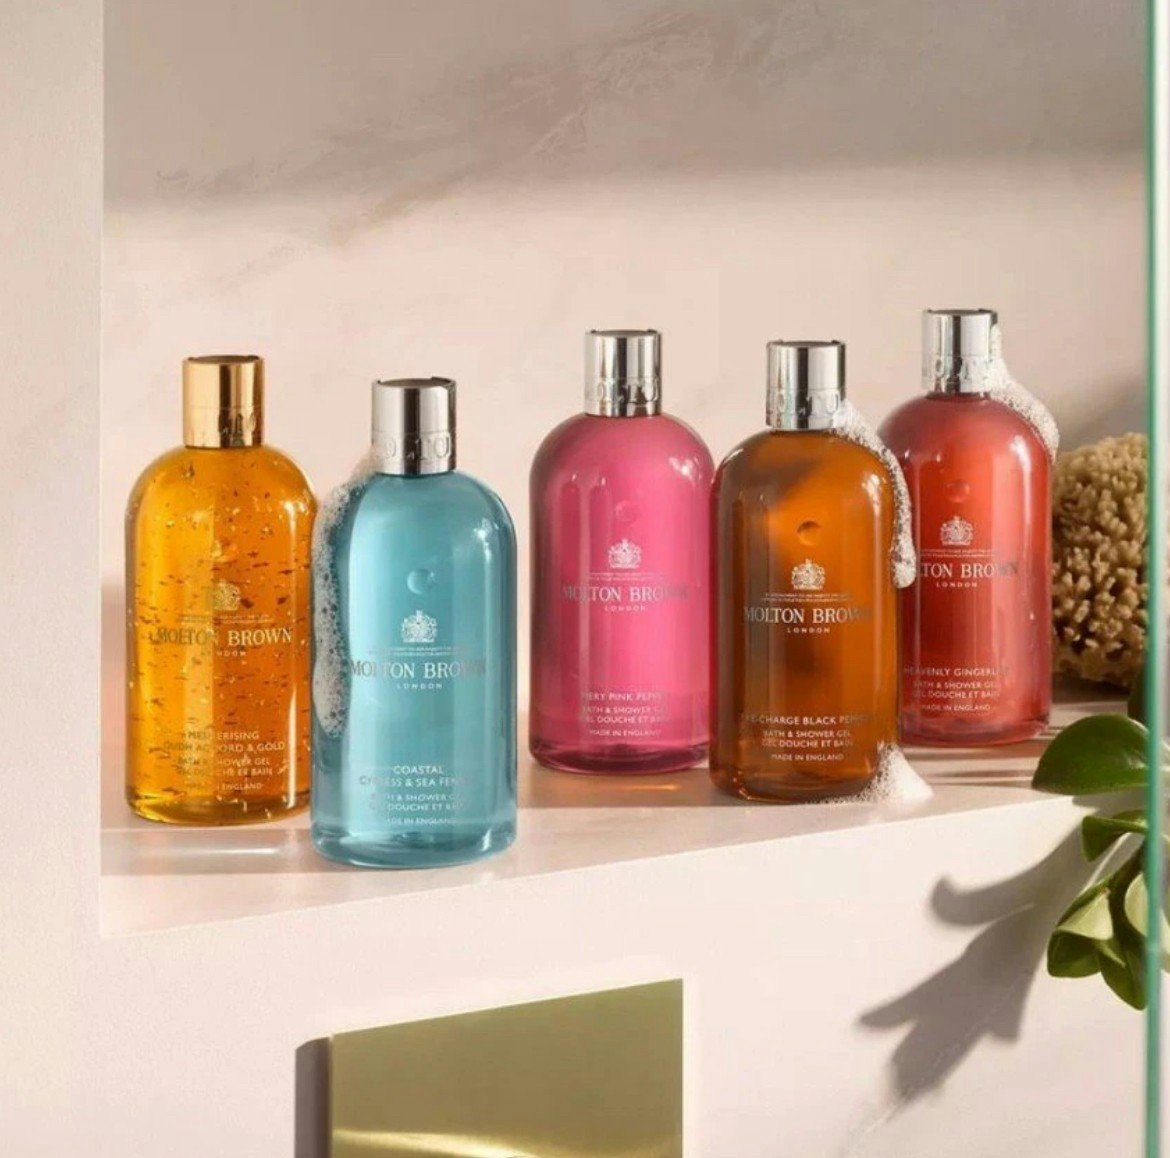 Molton Brown - Created By Belle AB